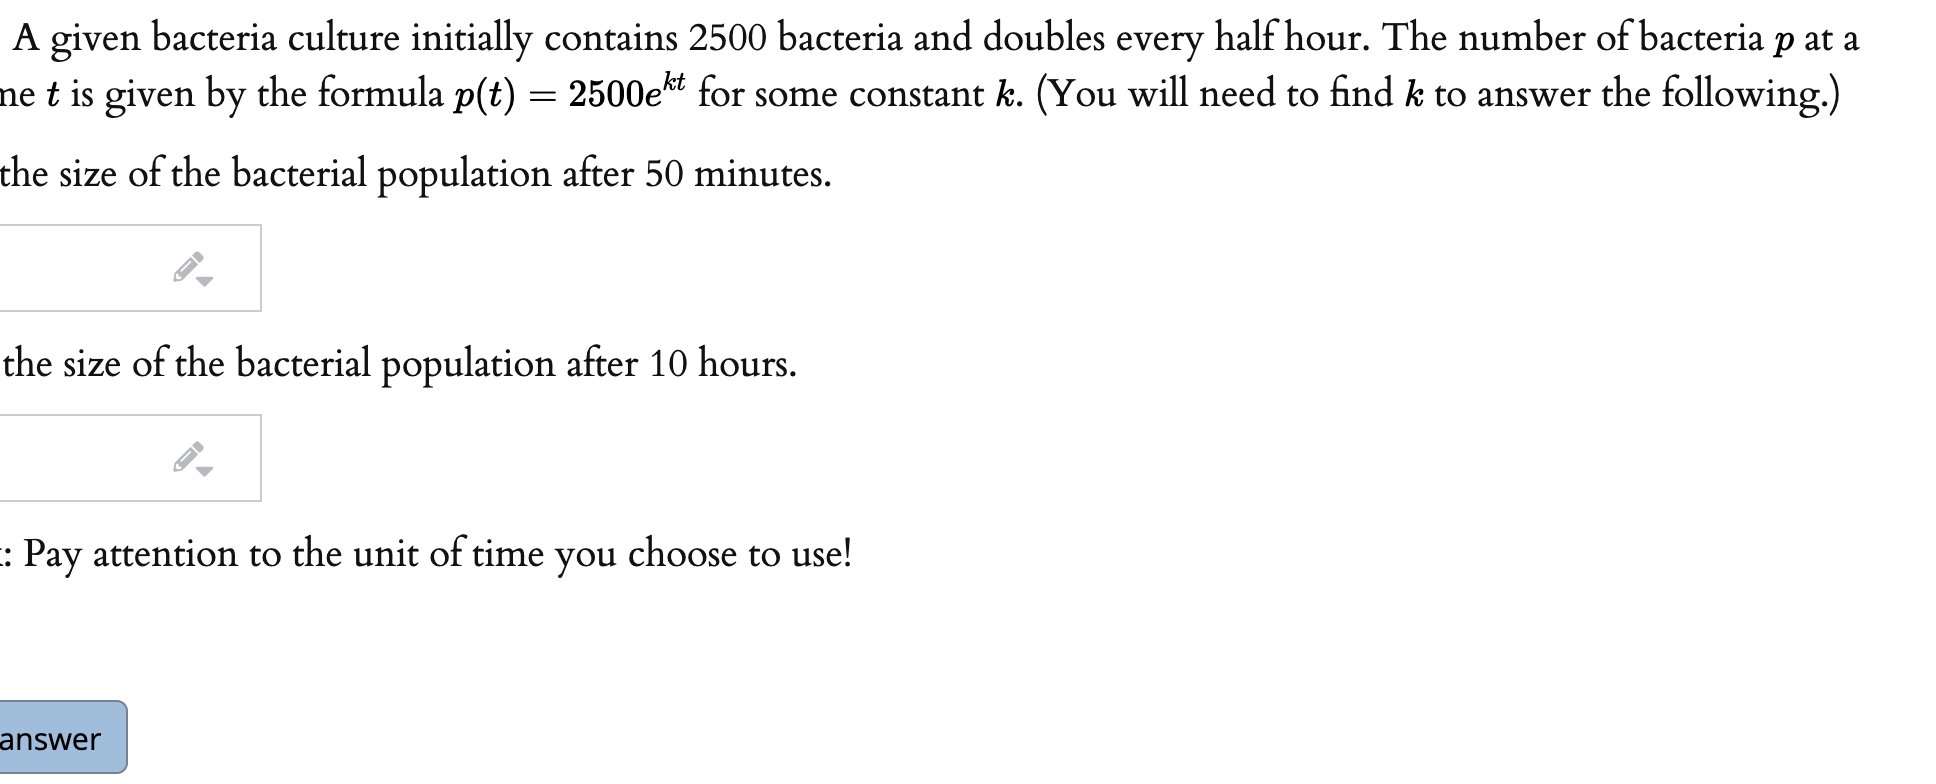 A given bacteria culture initially contains 2500 bacteria and doubles every half hour. The number of bacter
ne t is given by the formula p(t) = 2500e*t for some constant k. (You will need to find k to answer the follo
the size of the bacterial population after 50 minutes.
the size of the bacterial population after 10 hours.
